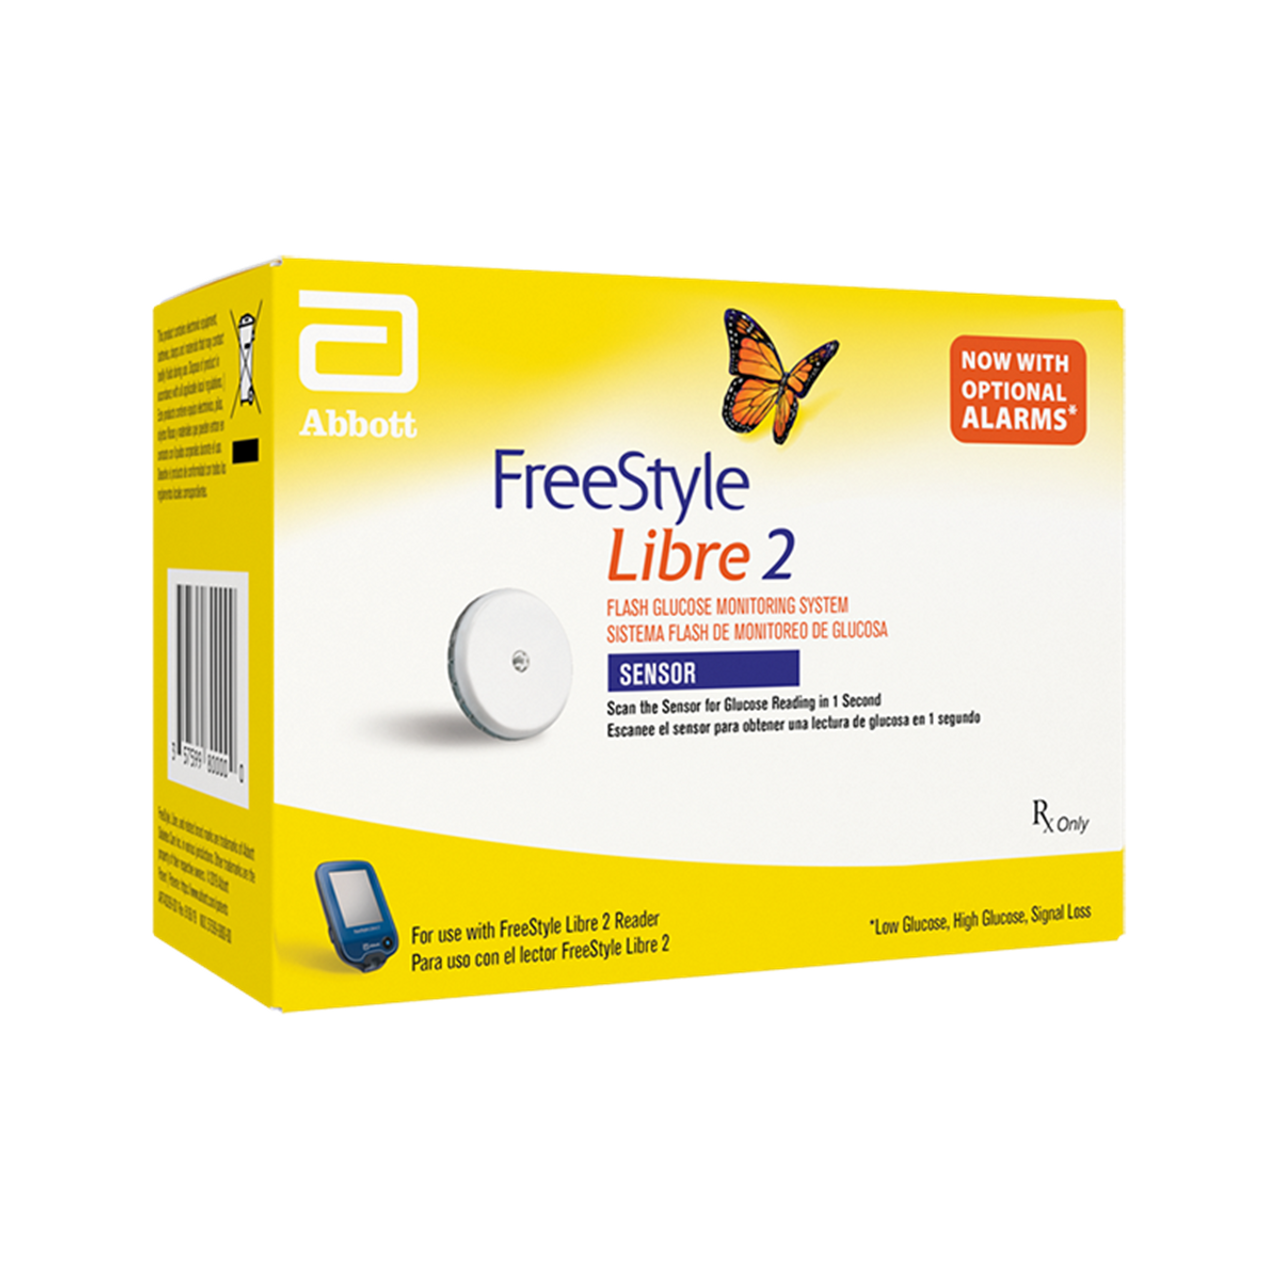 FreeStyle Libre 2 Sensor Painless Glucose Monitoring with Bluetooth Alerts